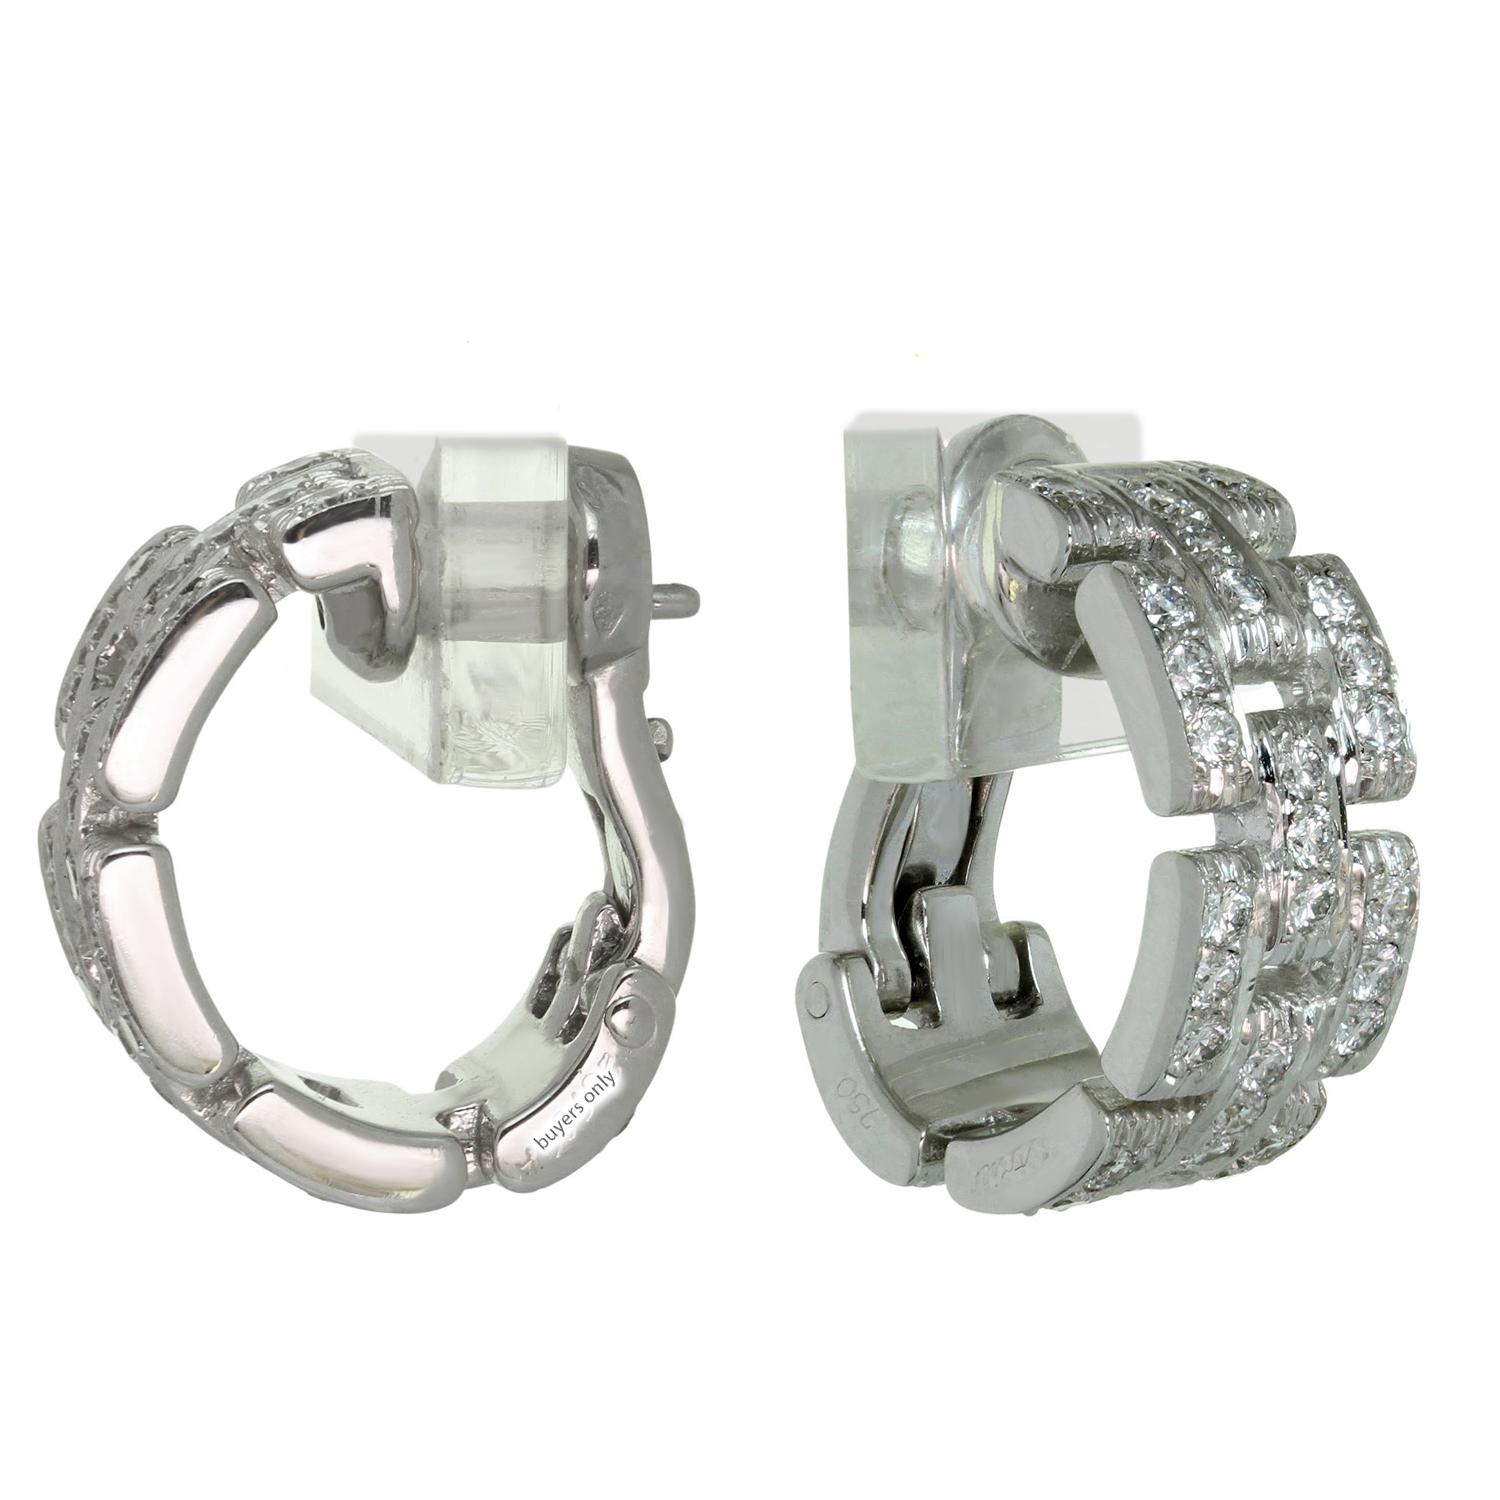 These gorgeous Cartier wrap earrings from the iconic Maillon Panthere collection are crafted in 18k white gold and feature conic solid links pave-set with 72 round brilliant cut diamonds weighing an estimated of 1.30 carats. Made in France circa